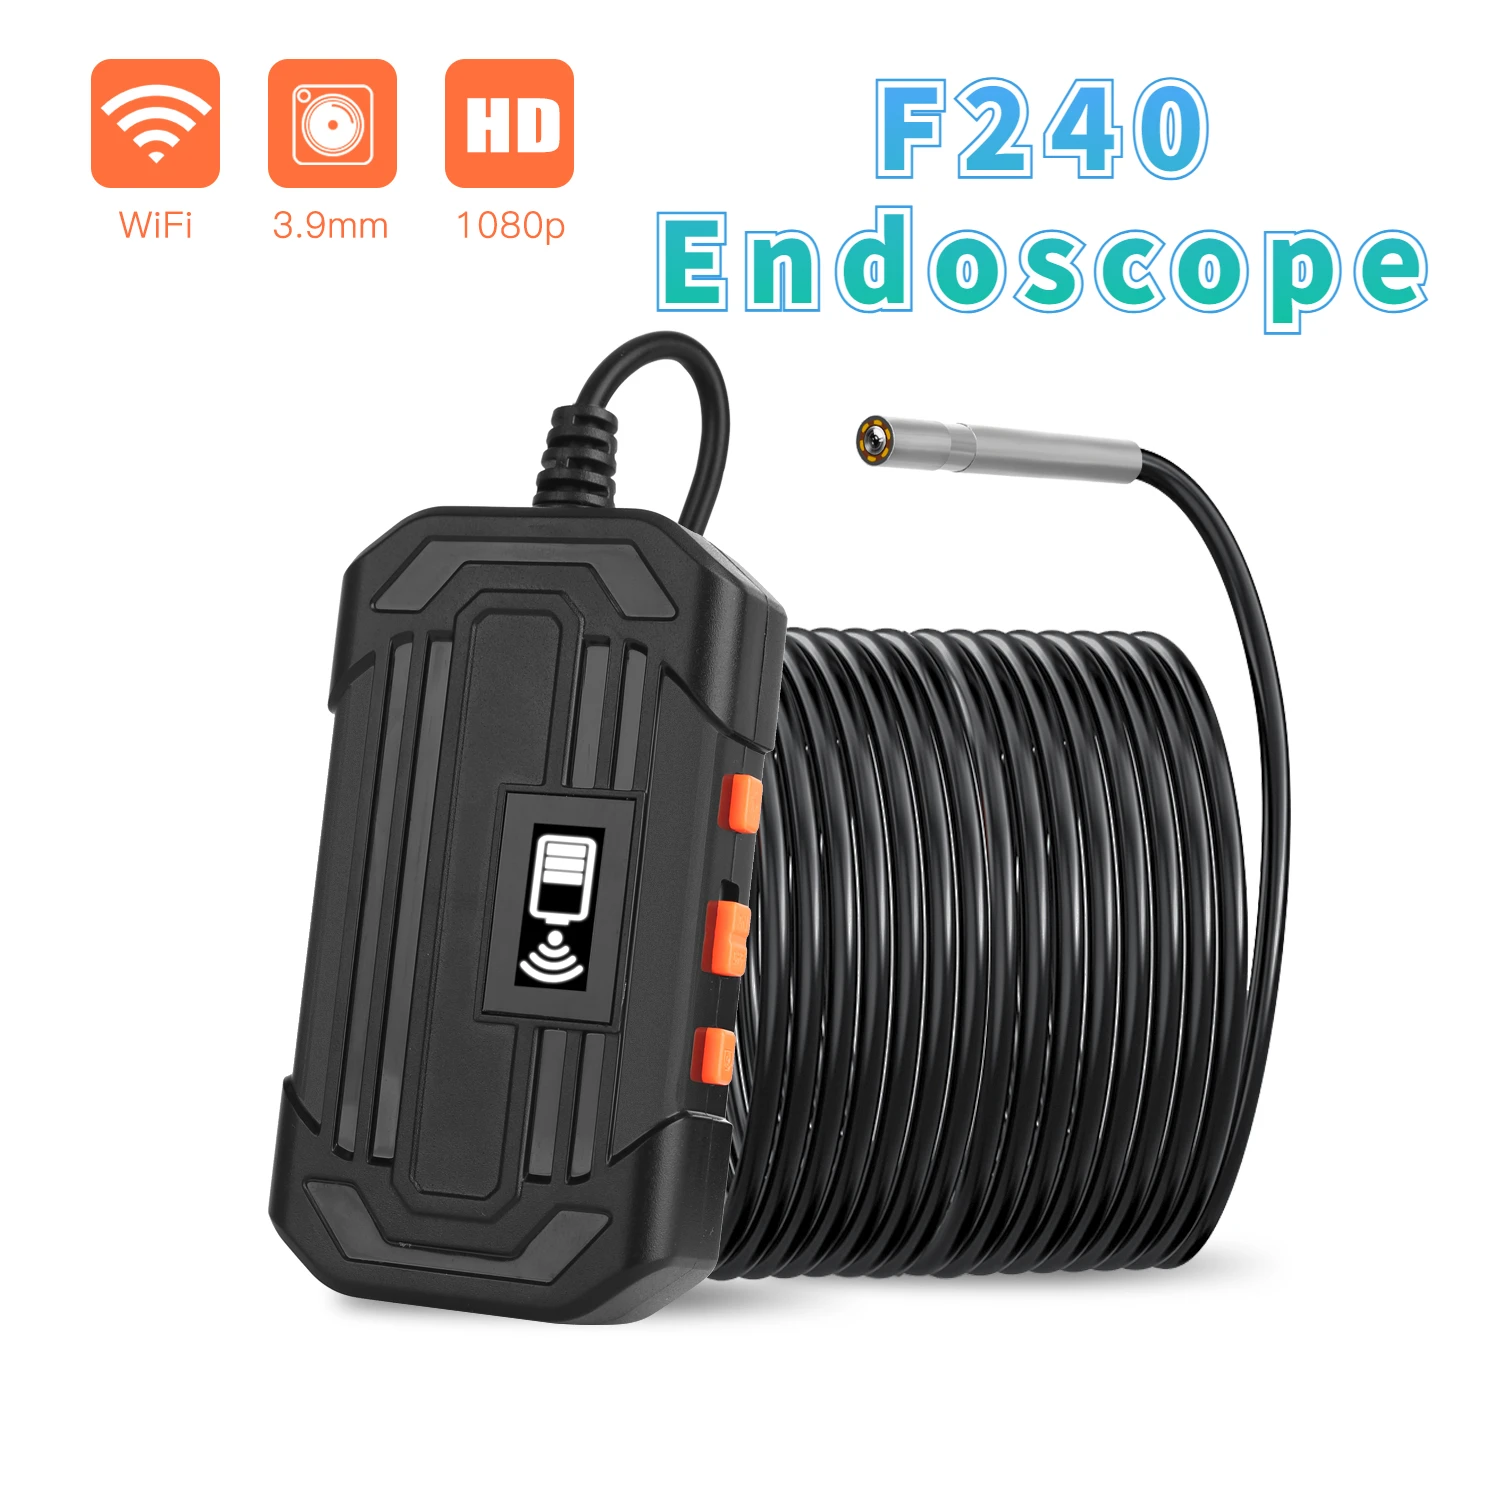 security camera system F240 Endoscope Camera 1080P HD Endoscope with 6 LEDs IP68 Waterproof Inspection Borescope 3.9mm Tiny Camera WIFI Endoscope security cameras with audio